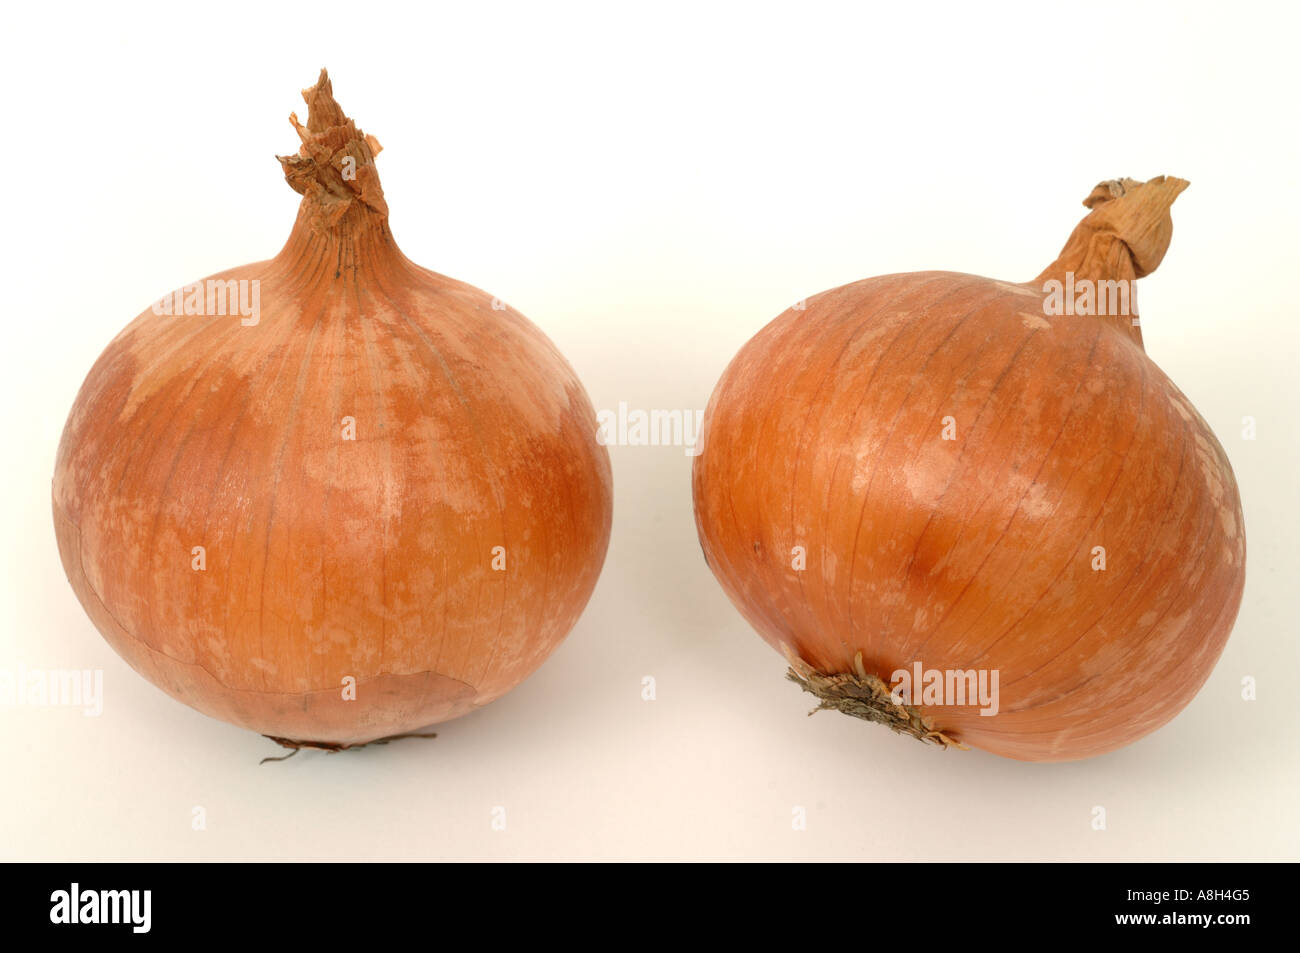 Root vegetable produce typical supermarket bought brown onions Stock Photo